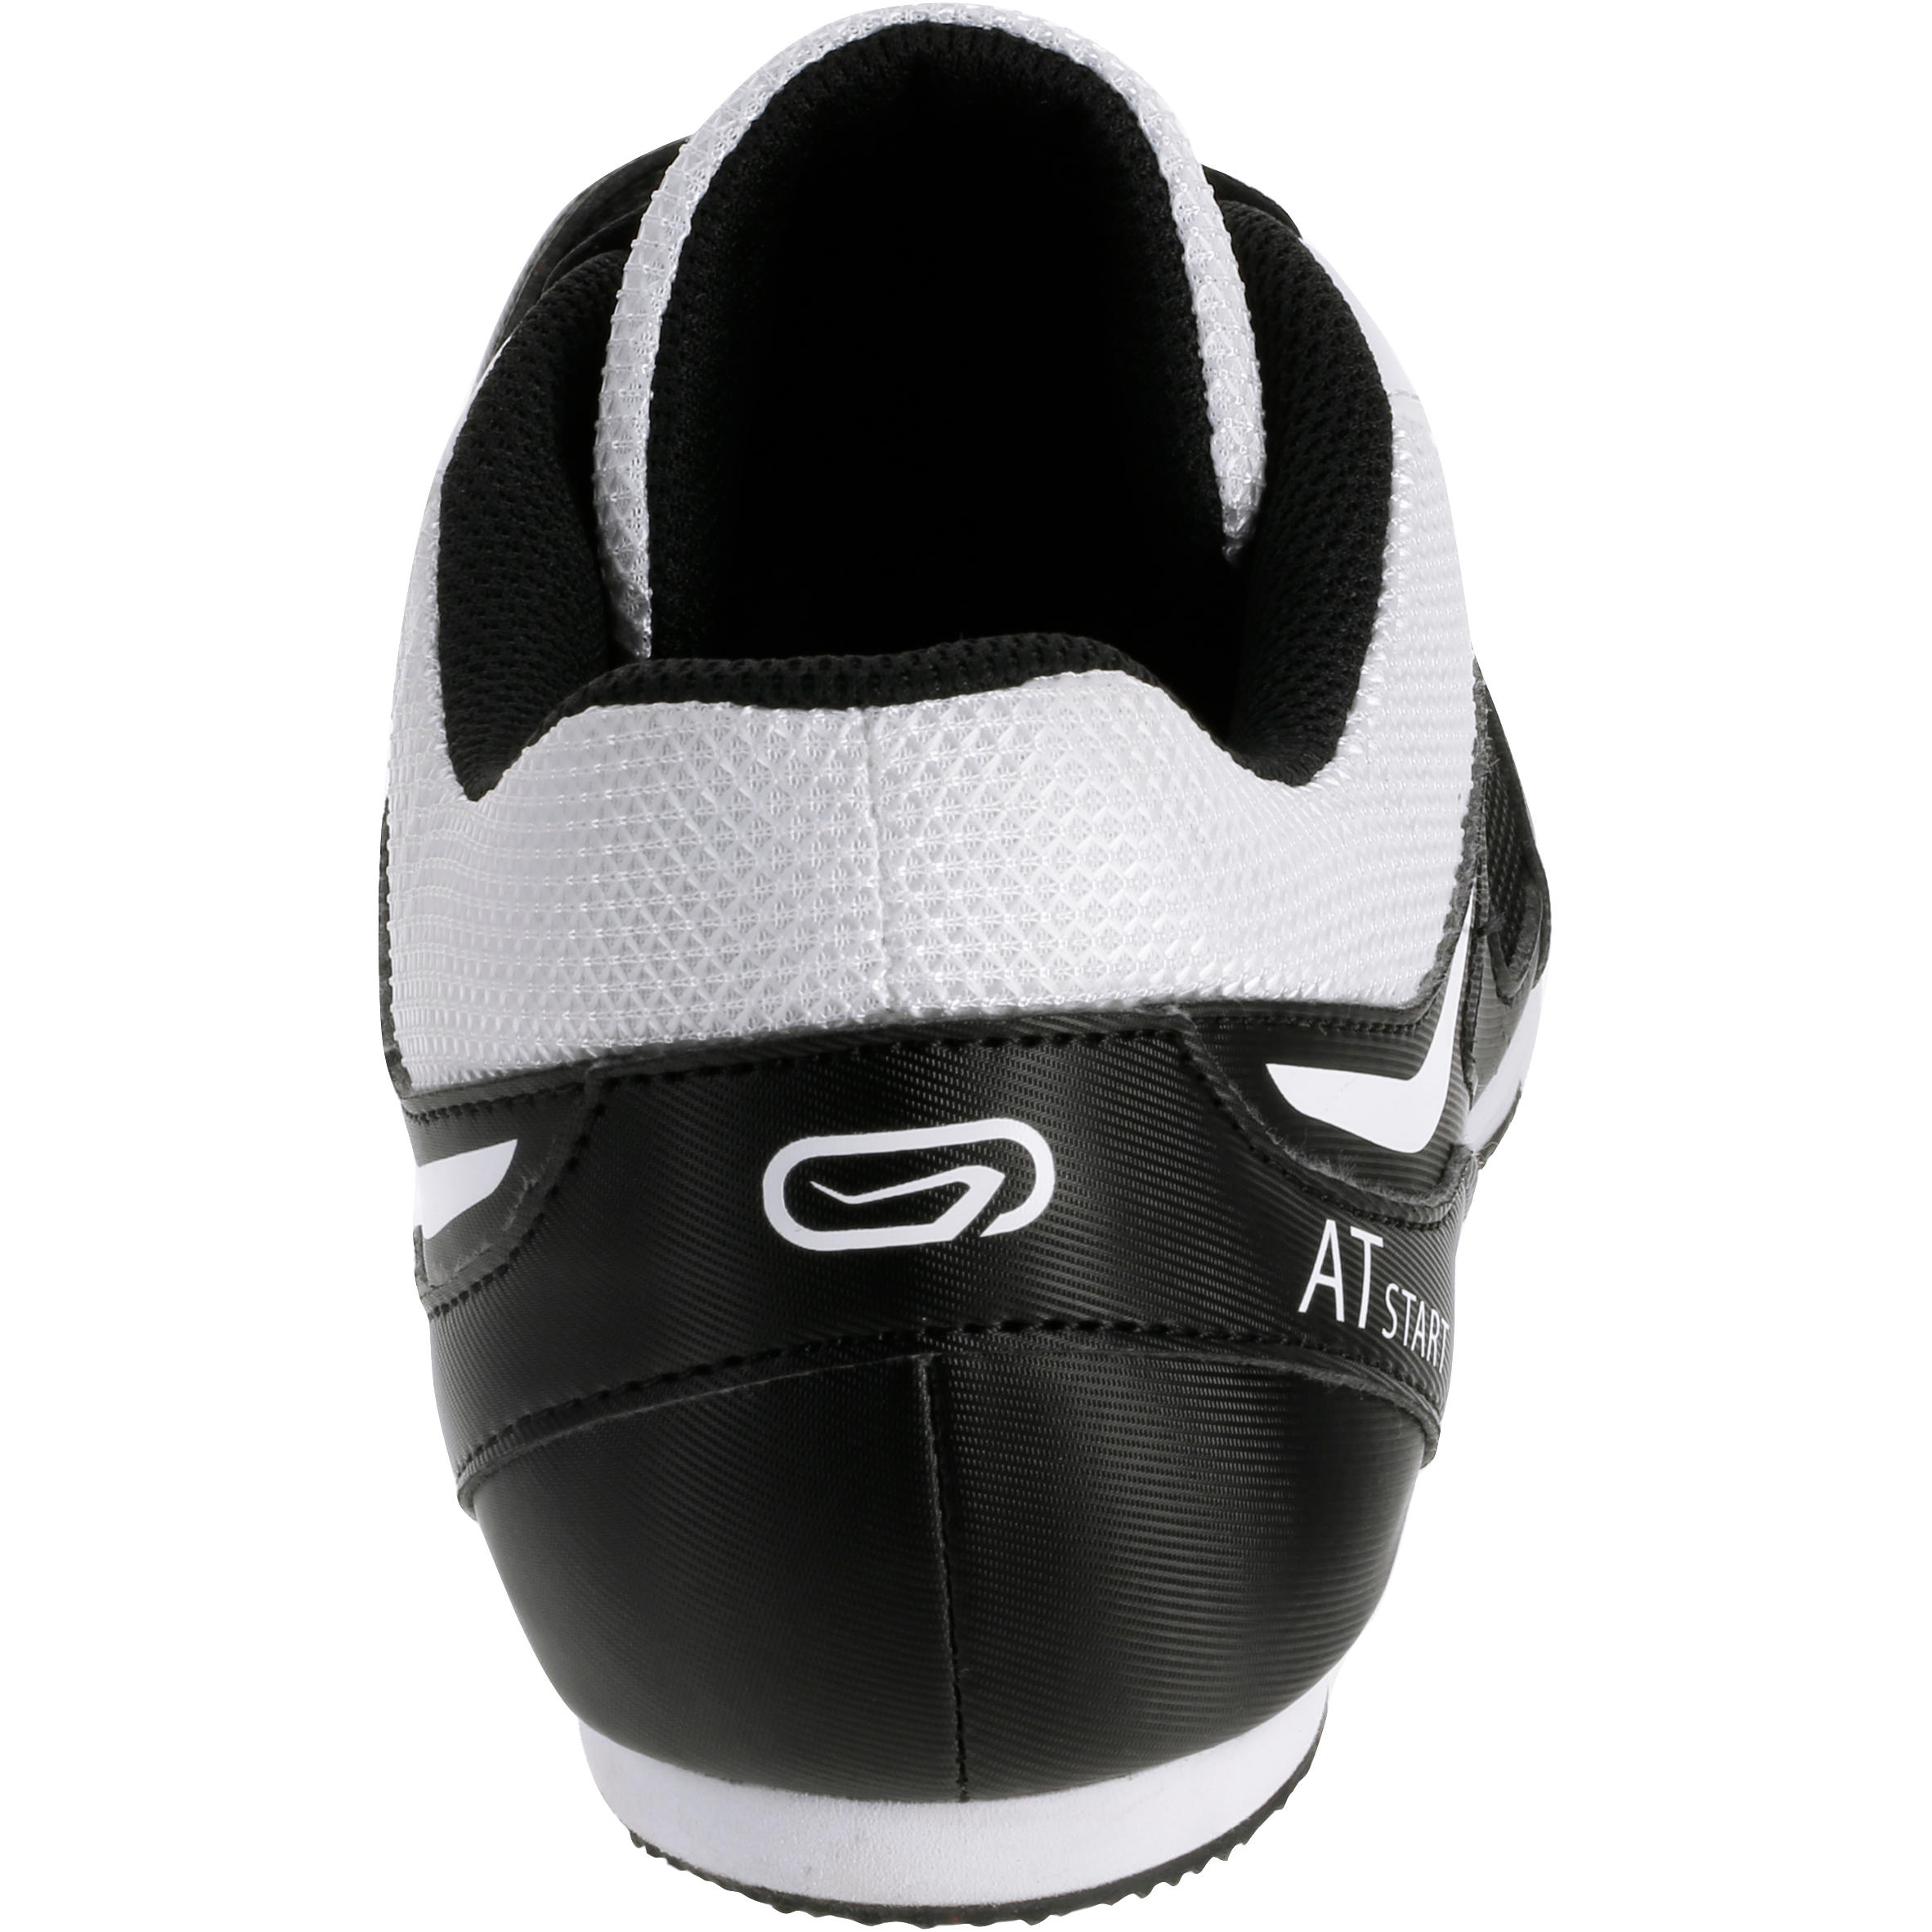 ATHLETICS TRAINERS WITH SPIKES BLACK WHITE 5/18